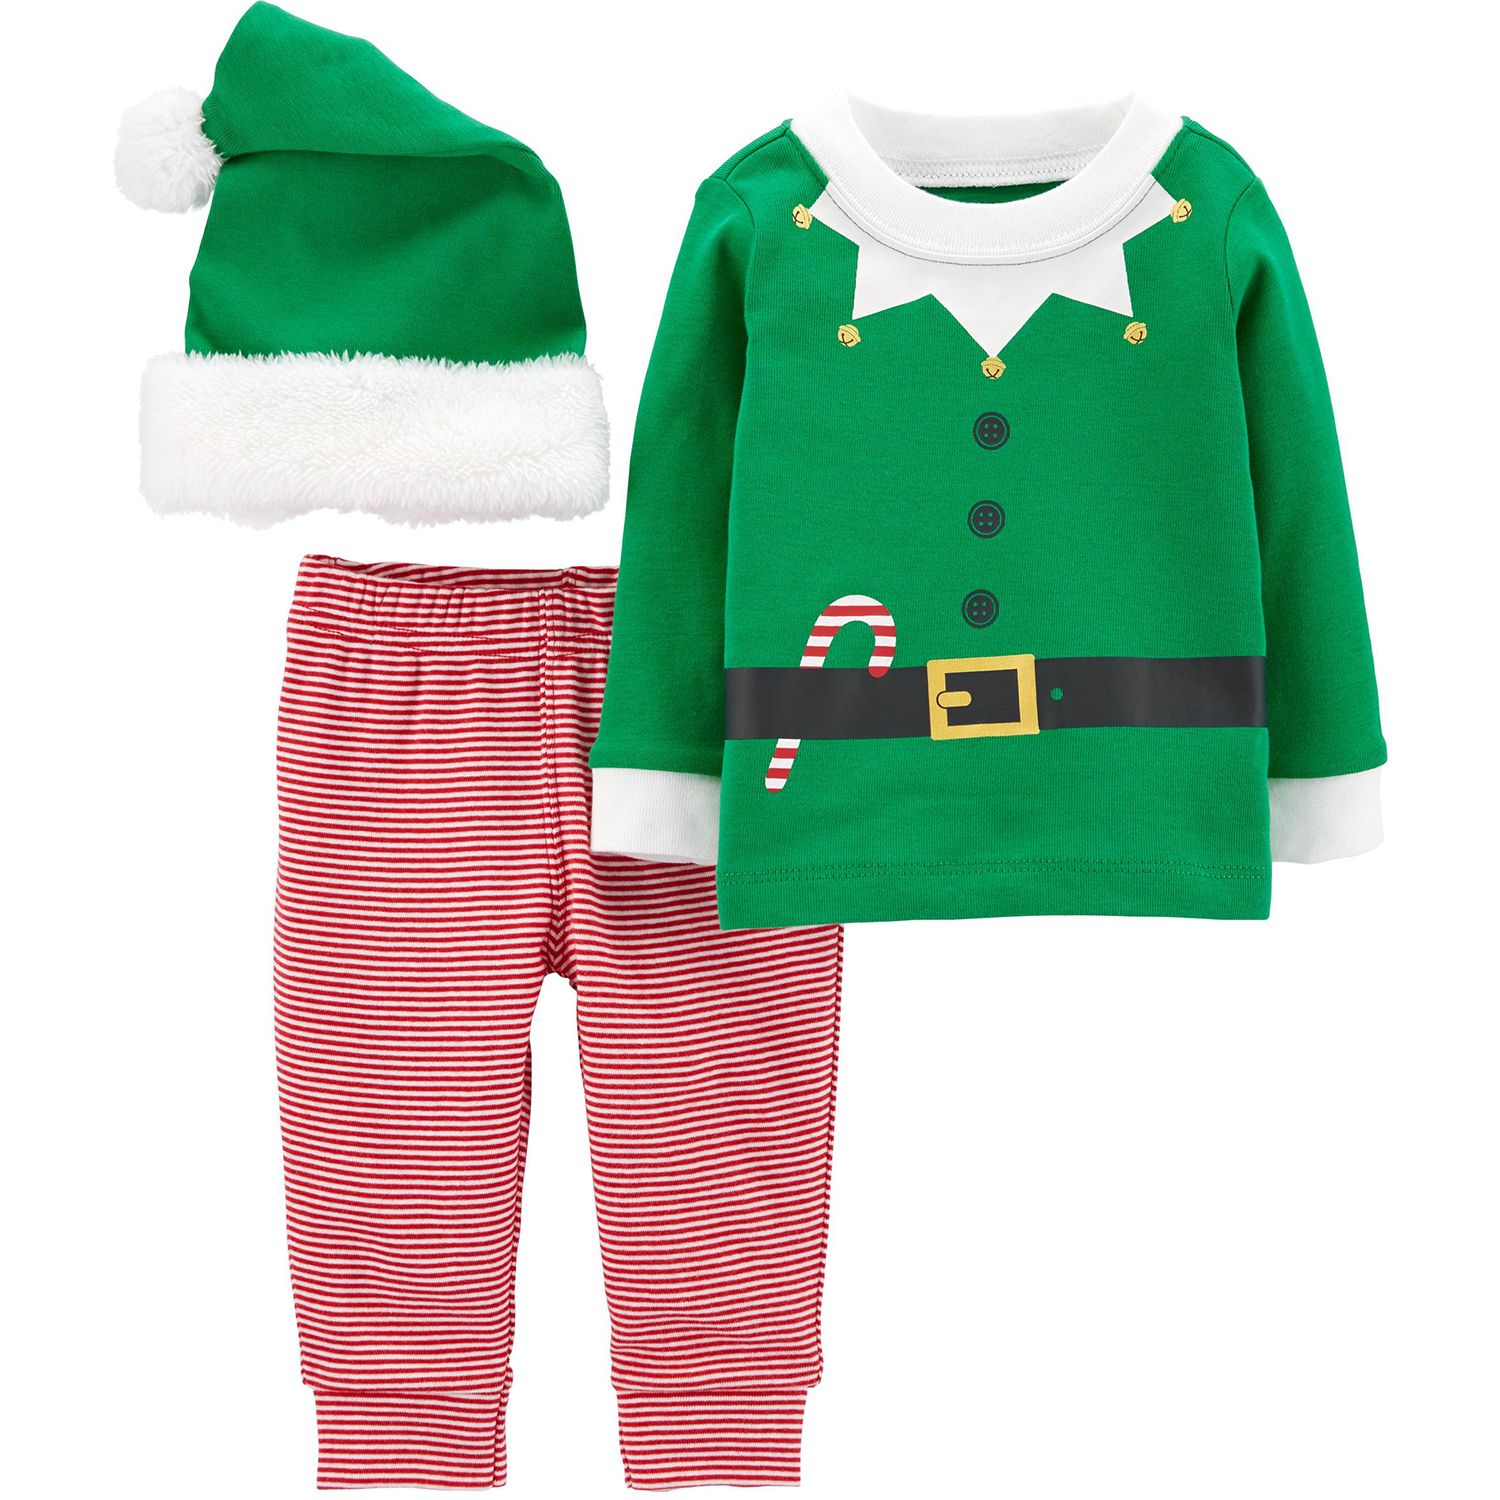 carters elf outfit